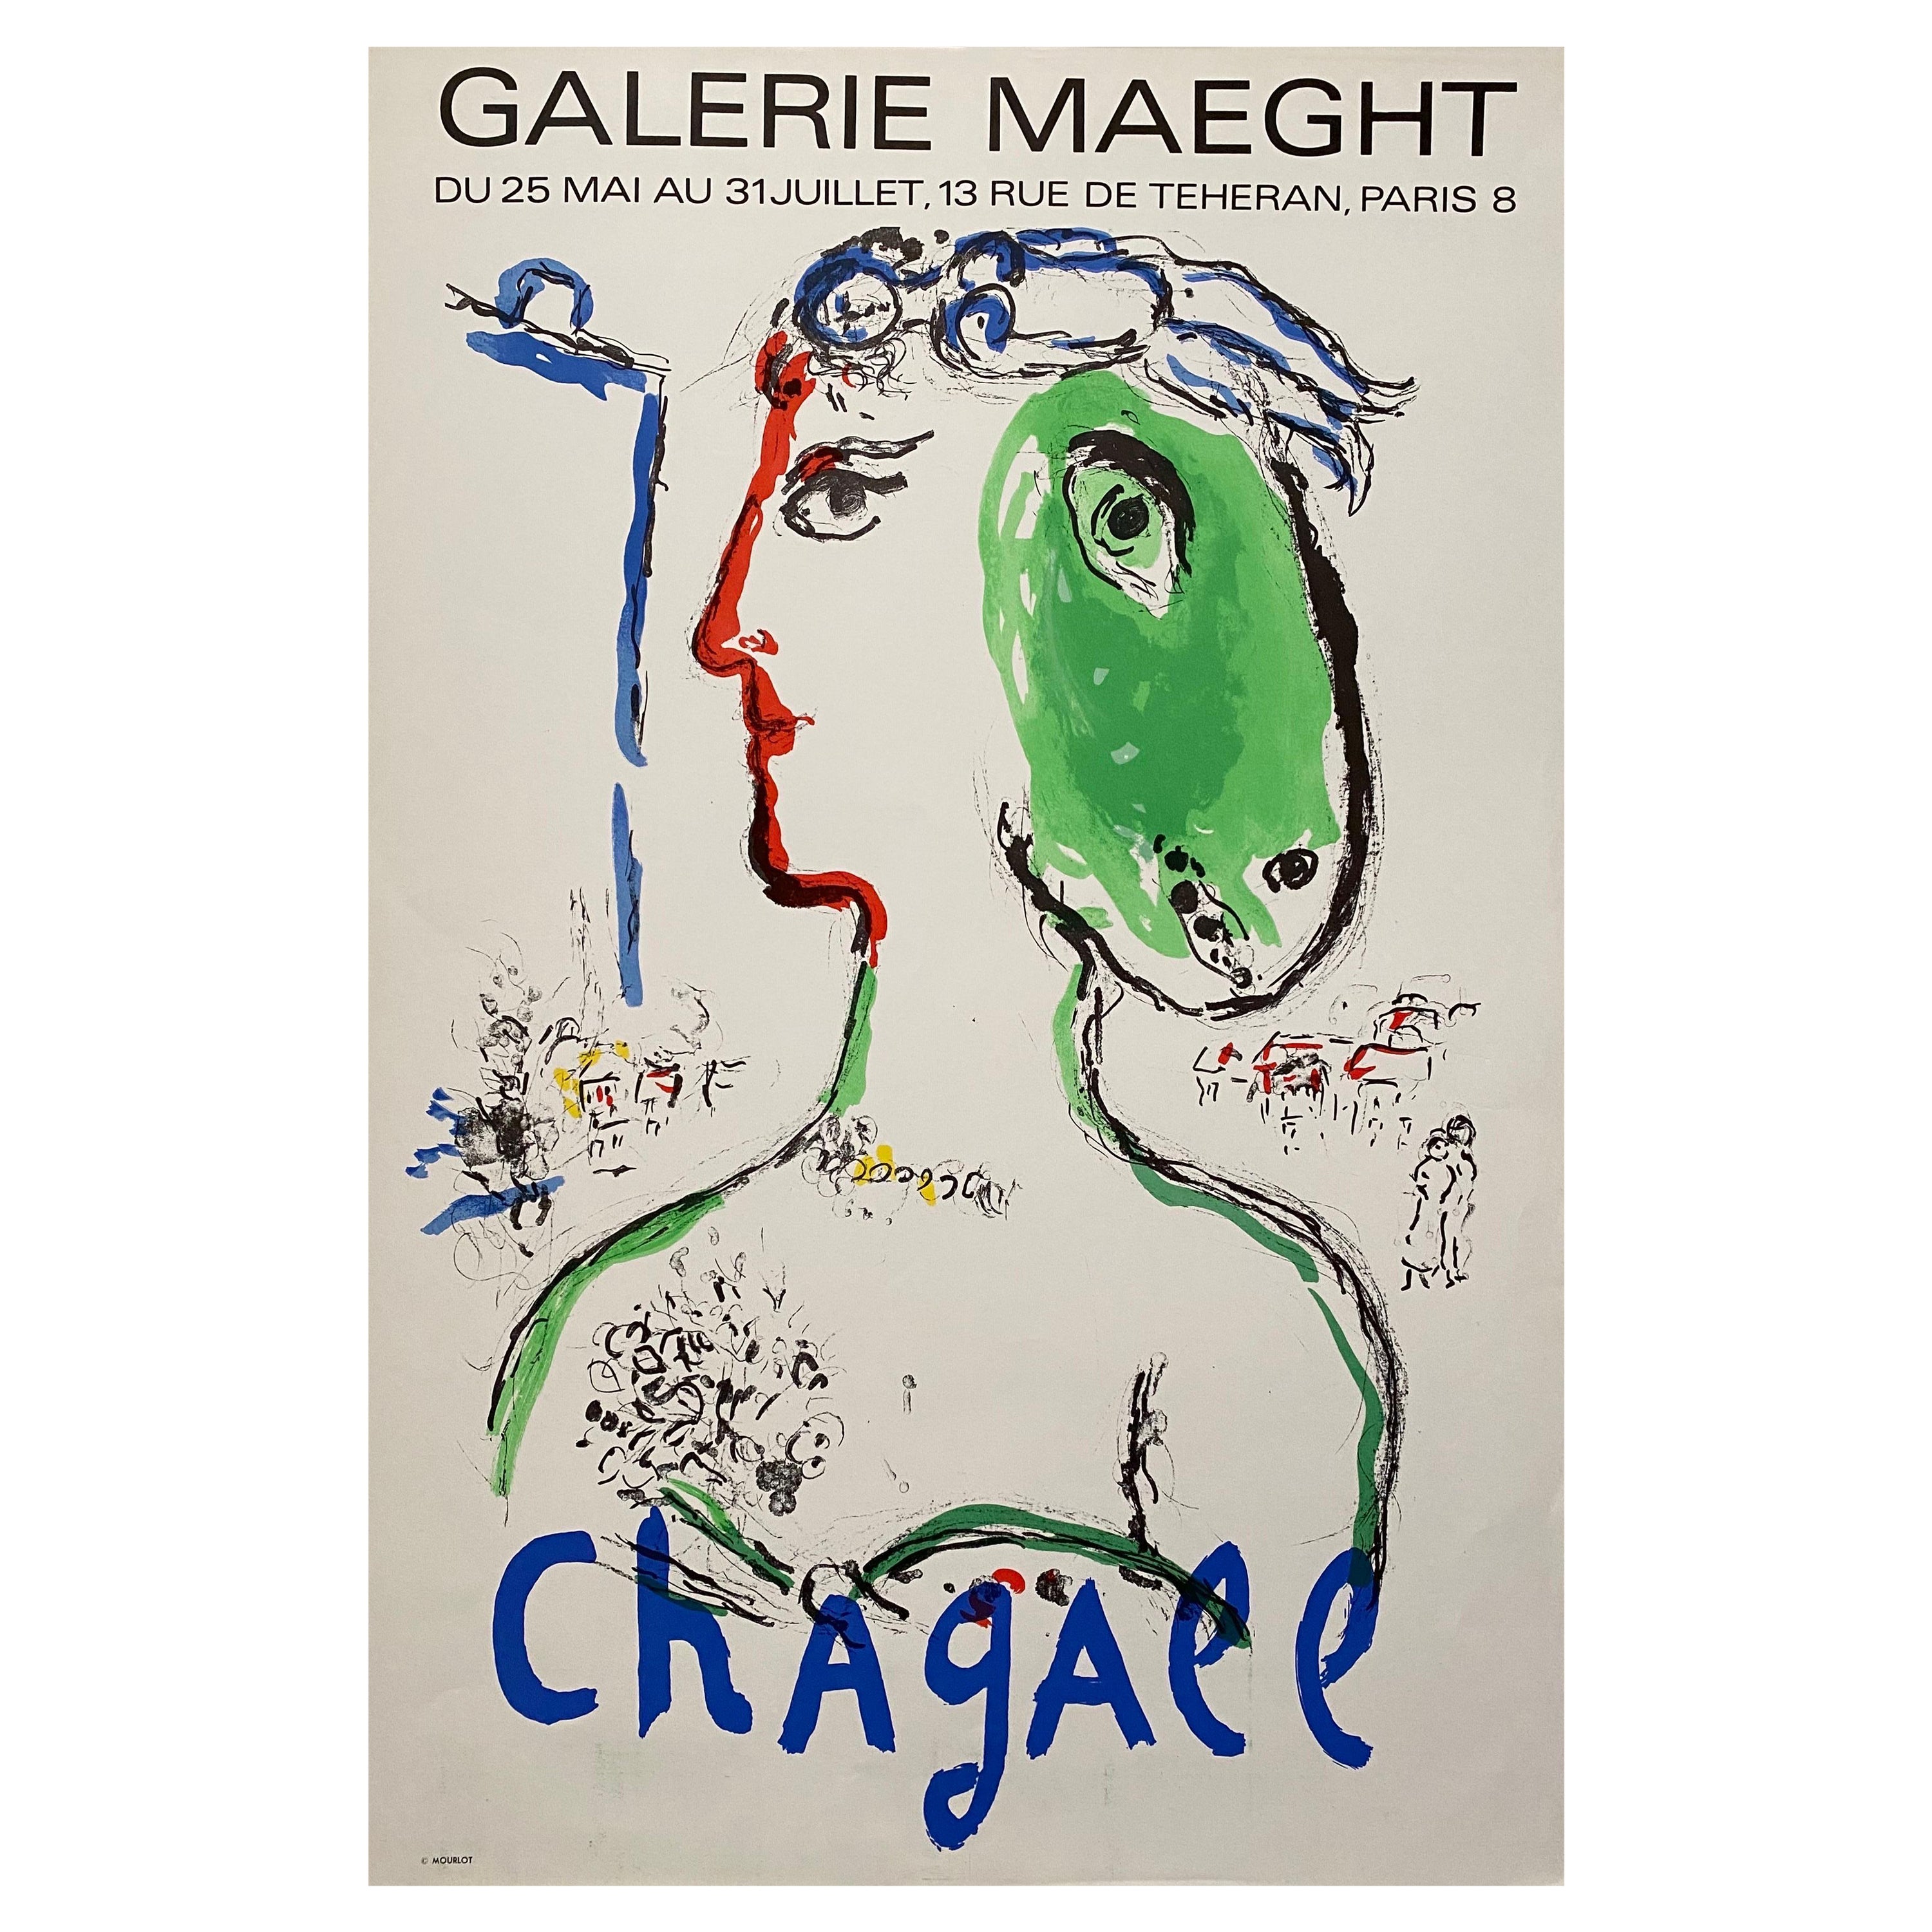 1972 Marc Chagall "l'Artiste Phenix" Printed For Galerie Maeght By Mourlot  For Sale